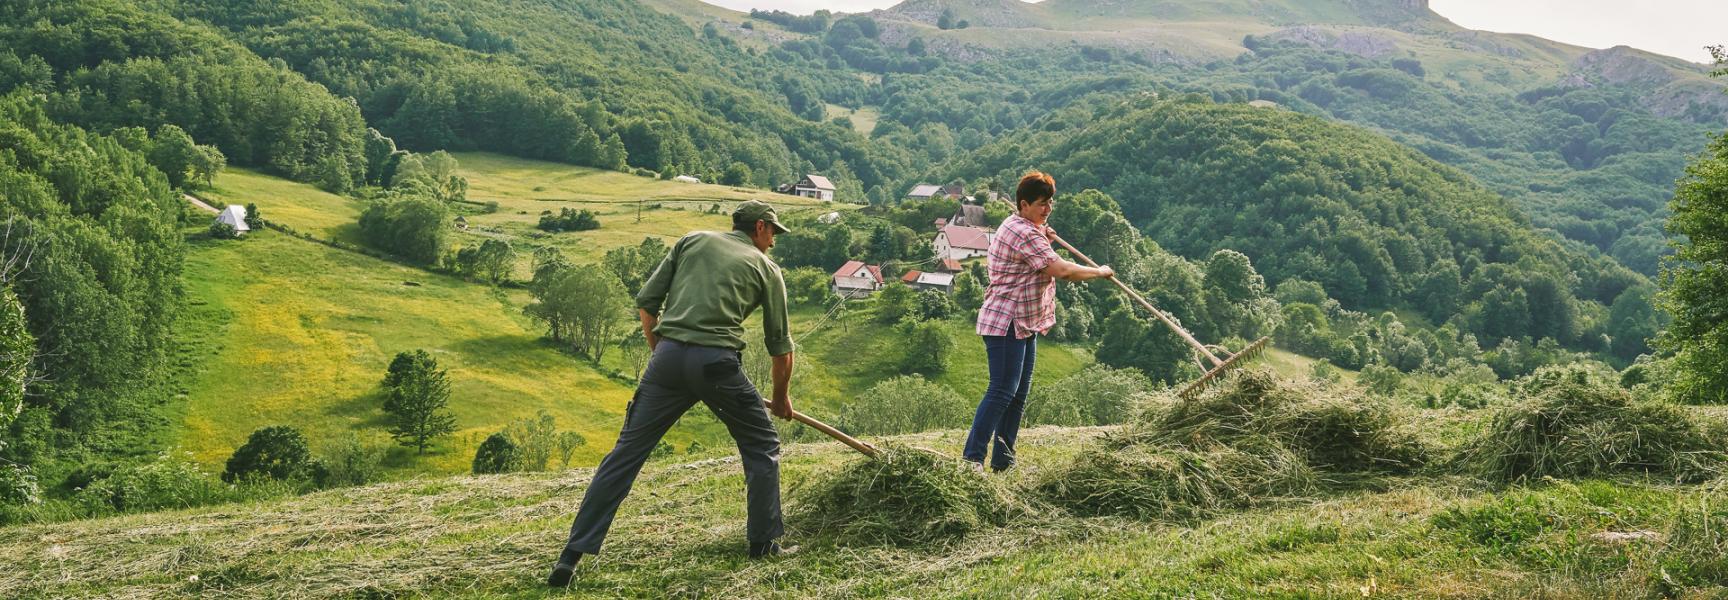 Farmers working in eco-tourism in Bosnia and Herzegovina